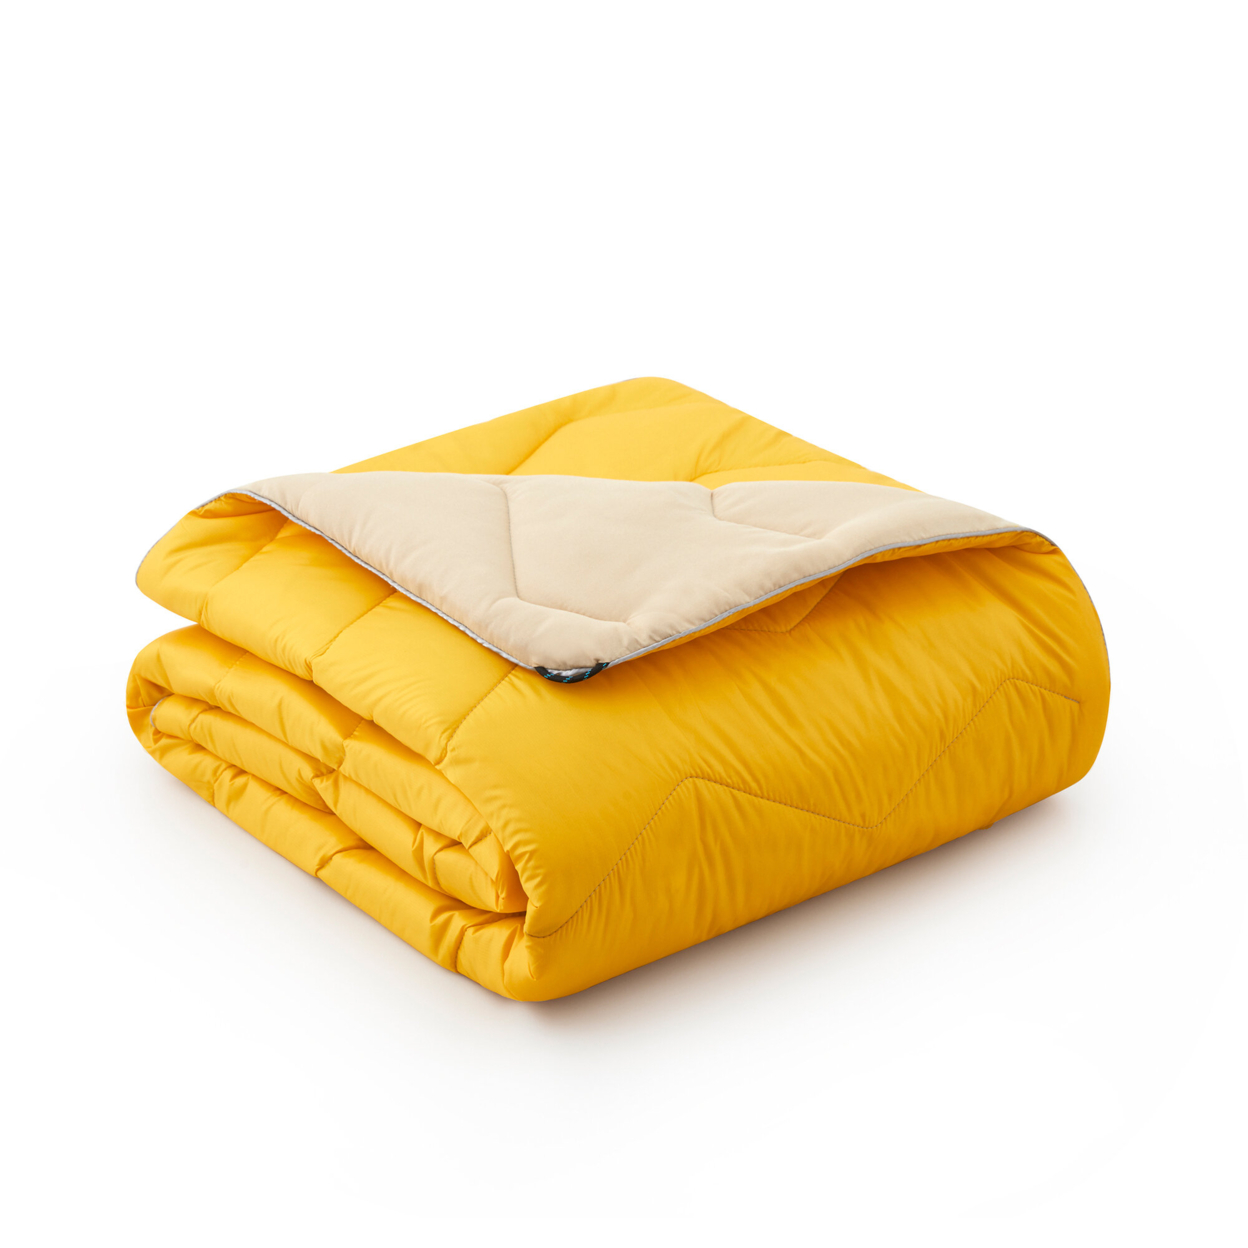 Waterproof Outdoor Blanket Packable for Camping, Hiking, Picnic and Travel - Yellow, King